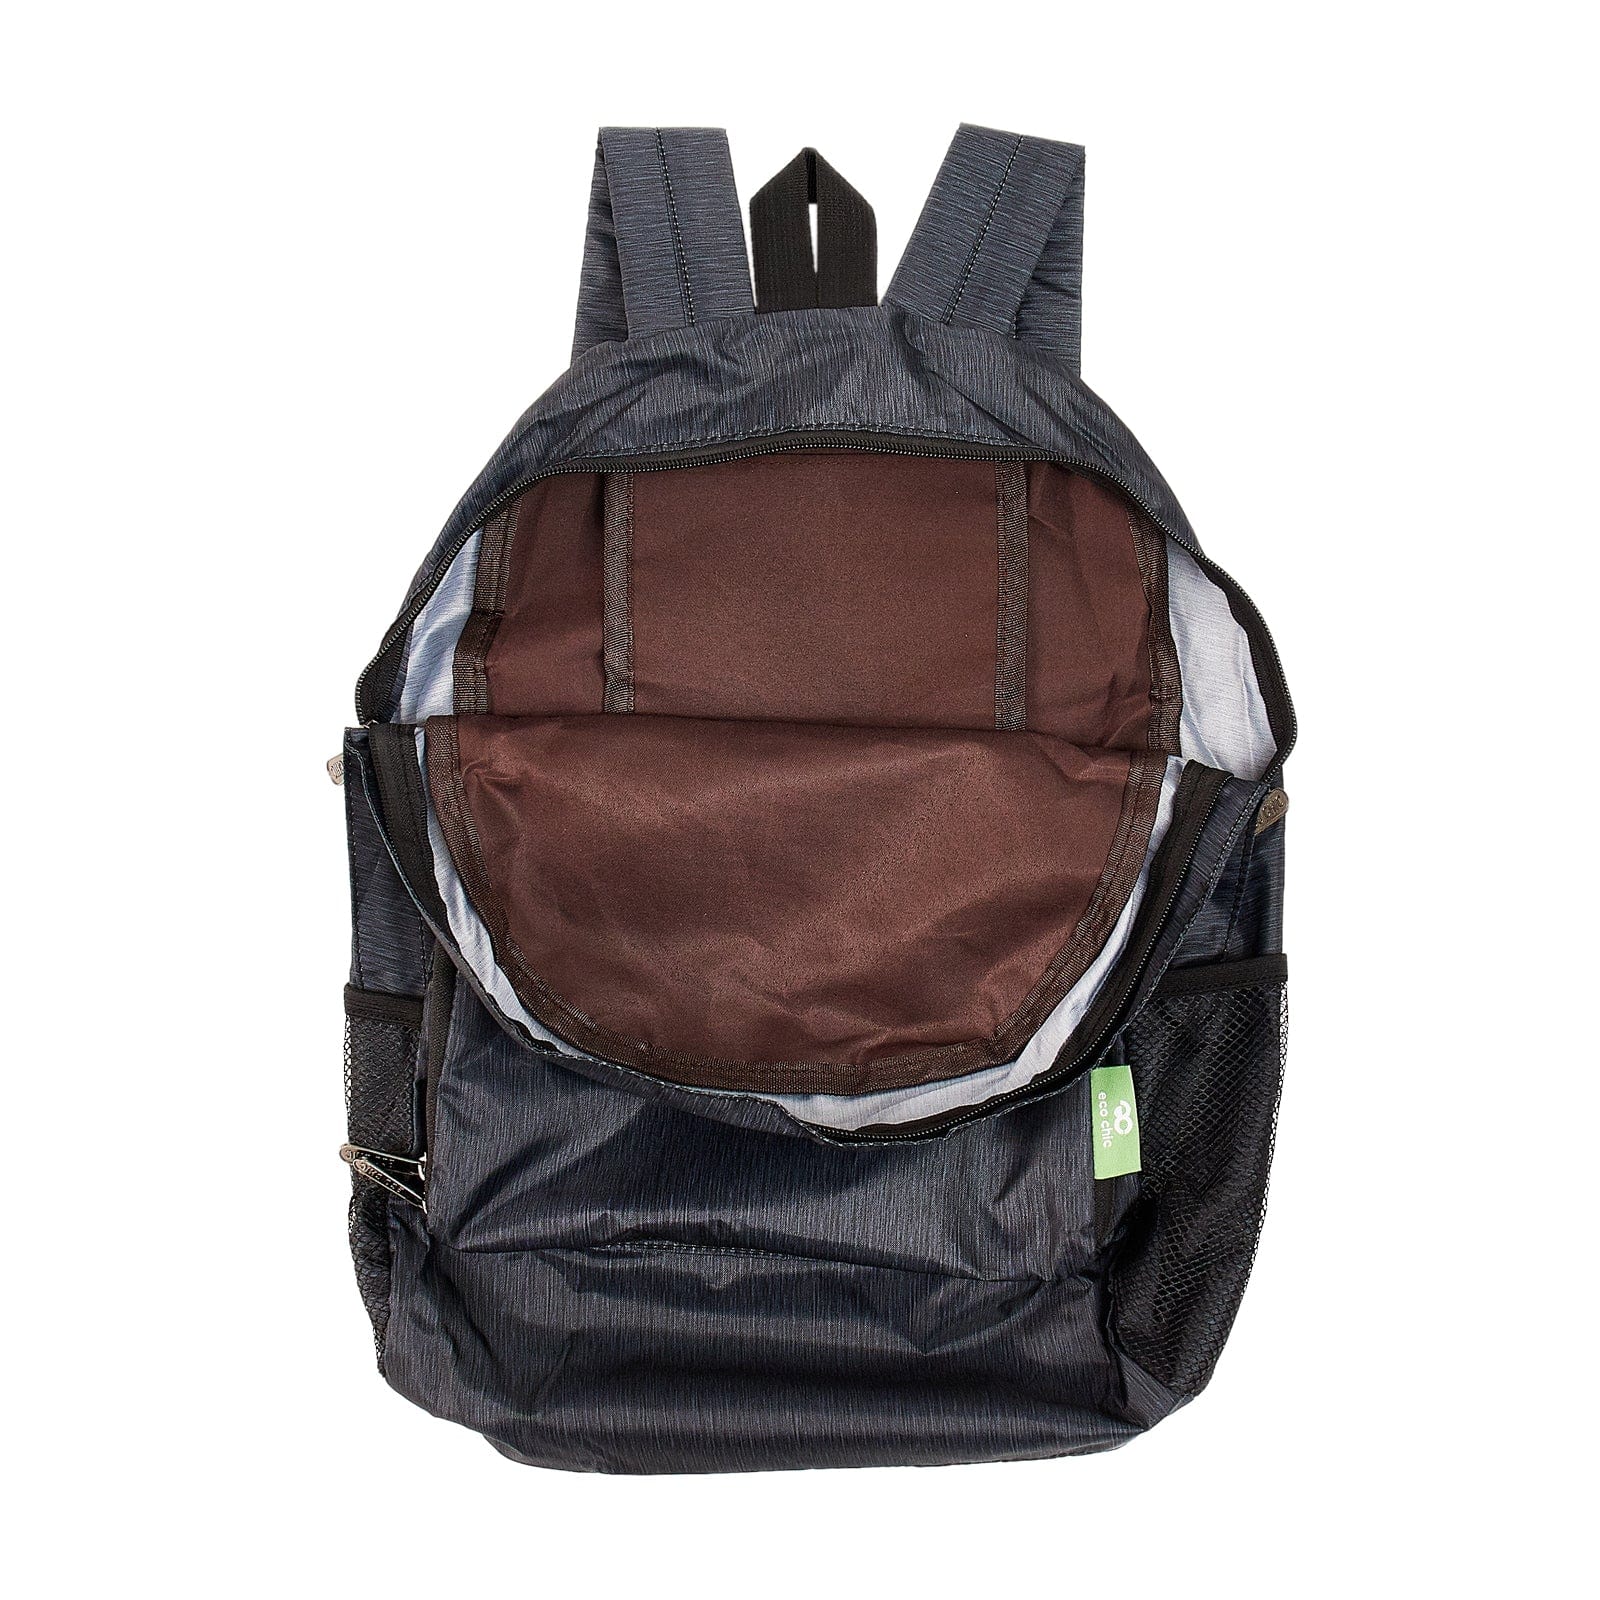 Eco Chic Eco Chic Lightweight Foldable Backpack Black